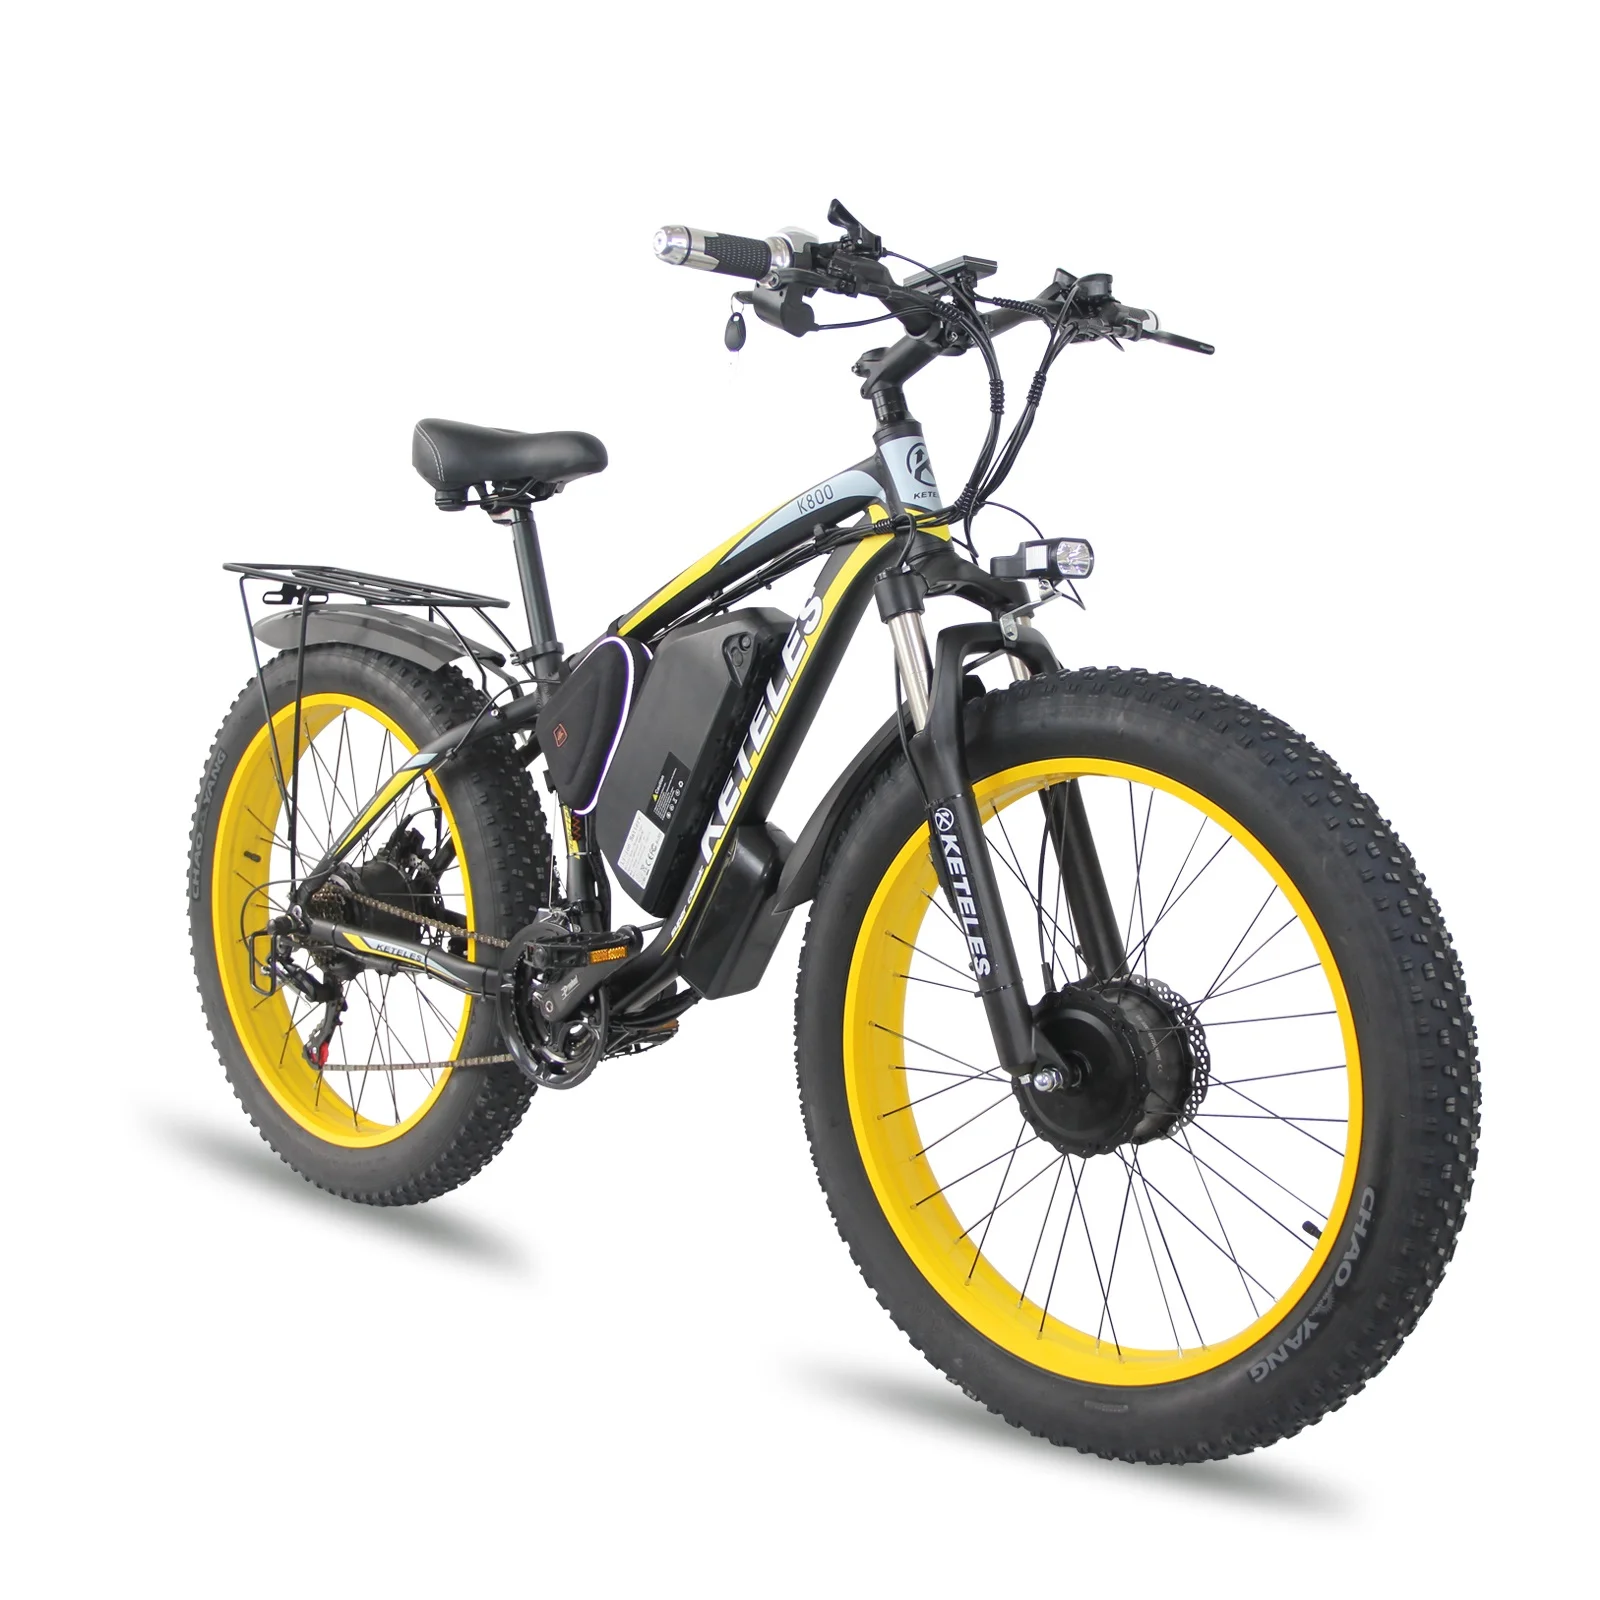 

KETELES K800 Double Motor 2 Wheel Drive 2000W Powerful Motor 17.5AH 26x4.0 inch Fat Tire Lithium Battery Electric Bicycle